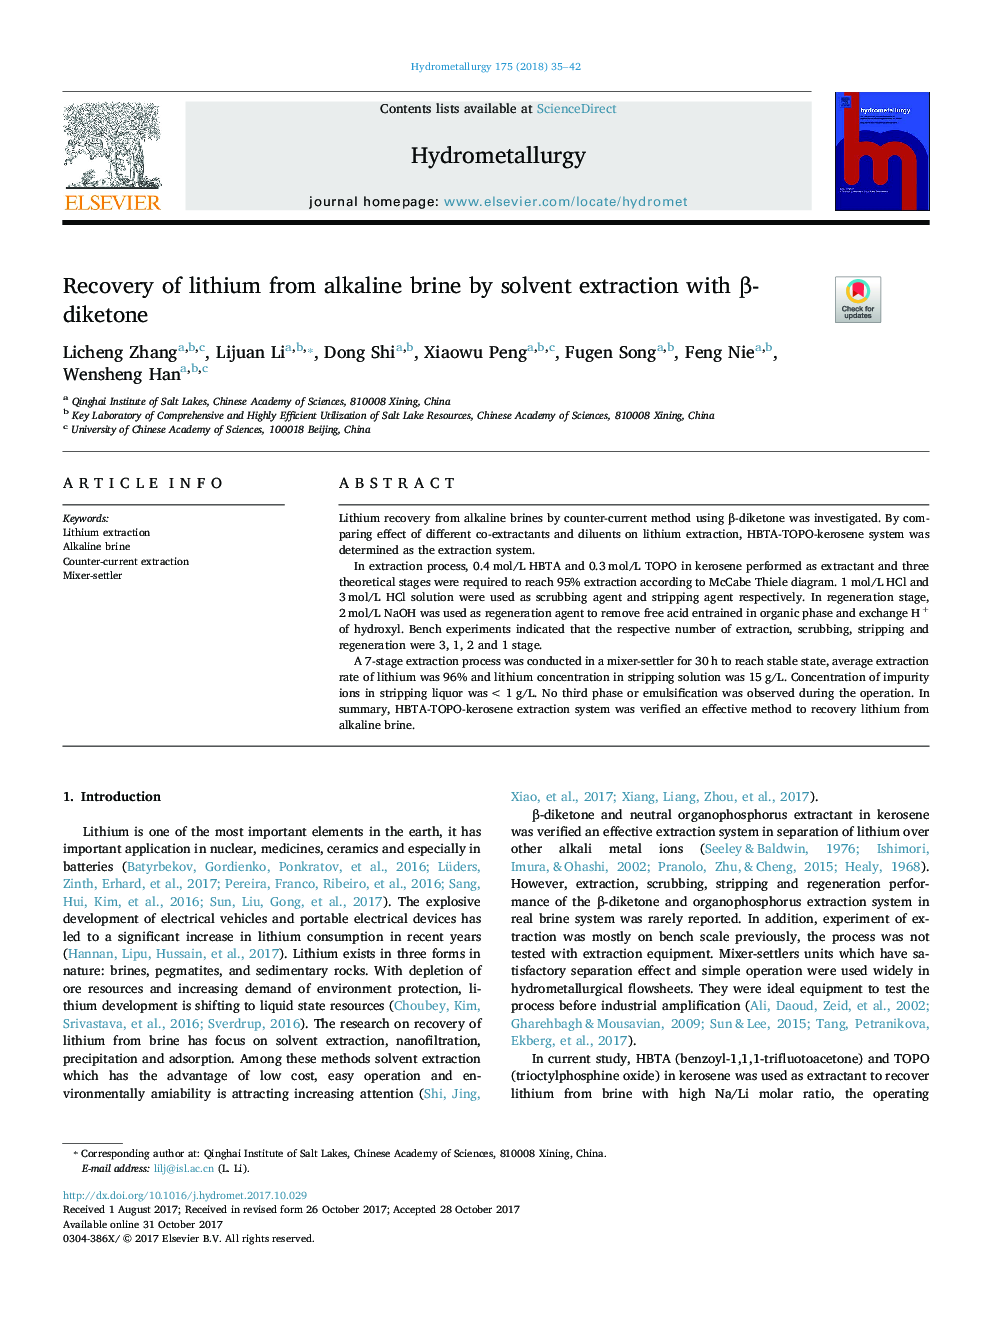 Recovery of lithium from alkaline brine by solvent extraction with Î²-diketone